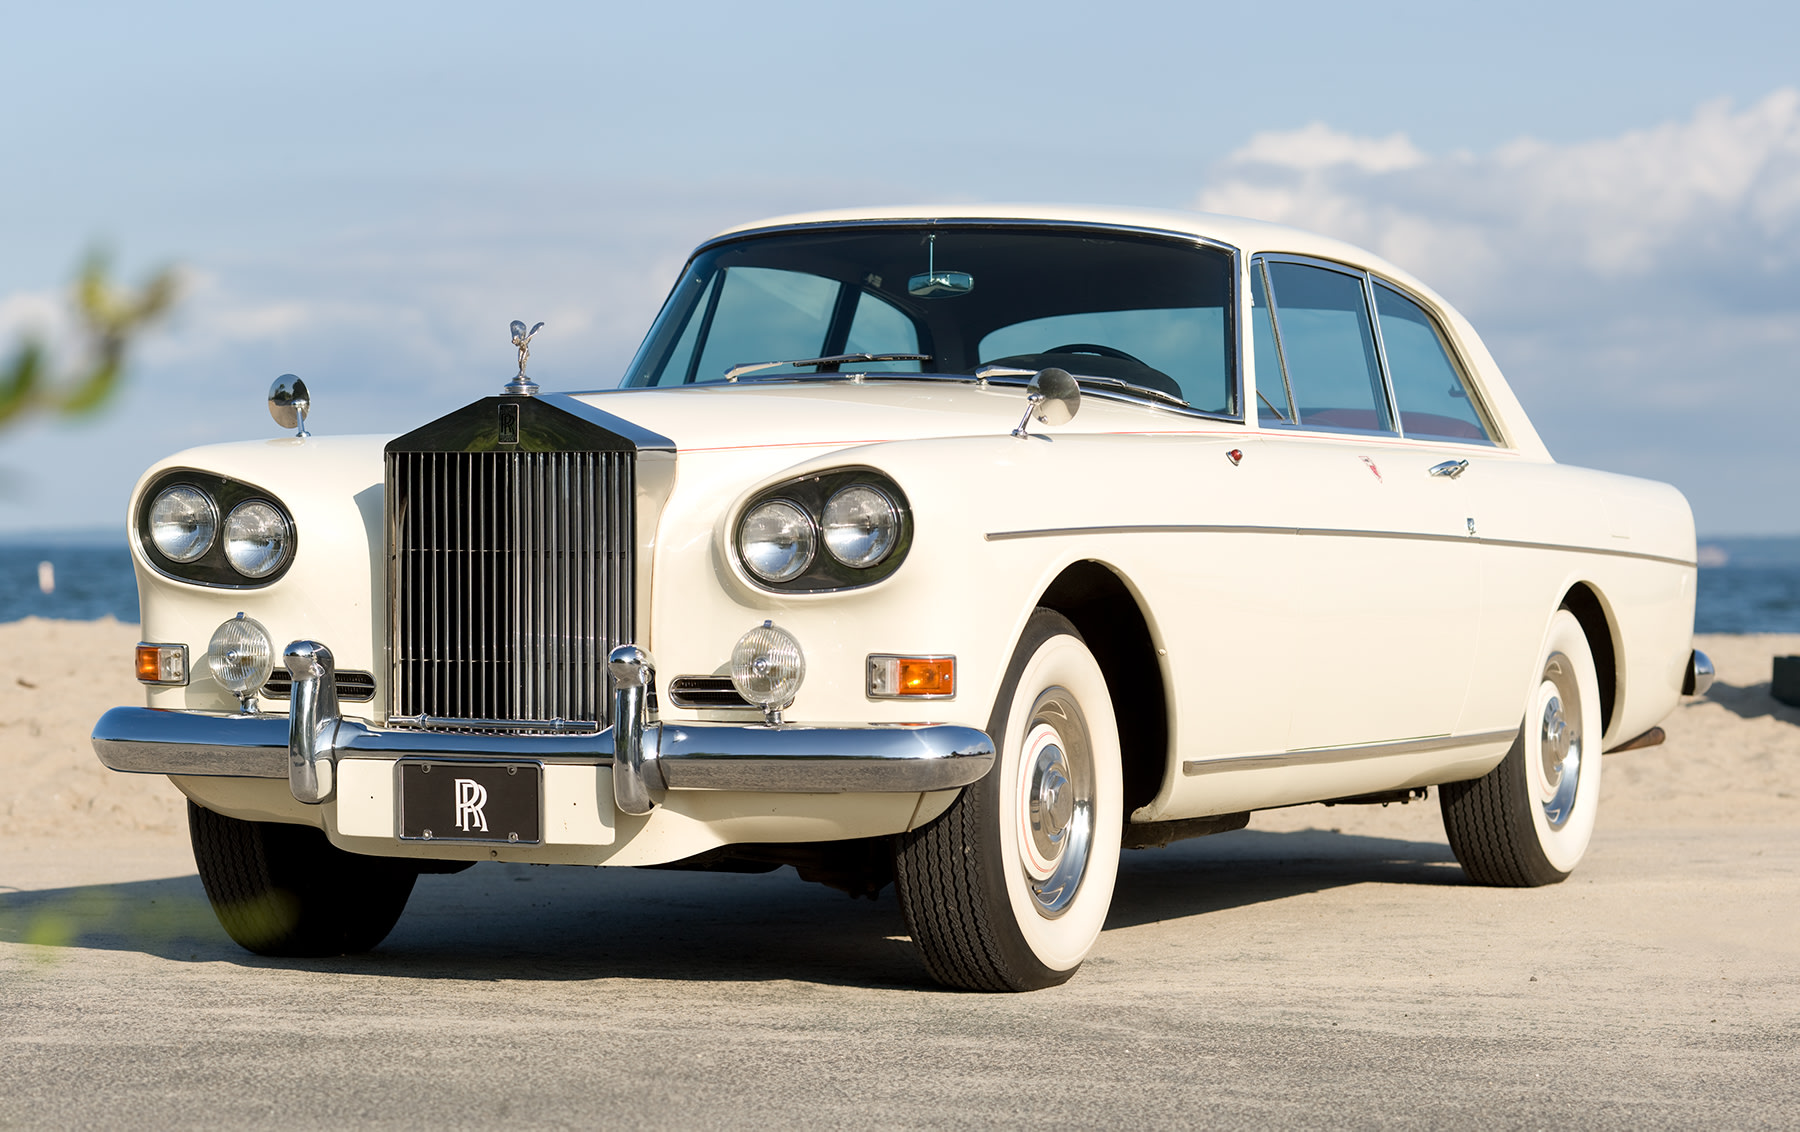 1965 Rolls-Royce Silver Cloud III Continental Coupe